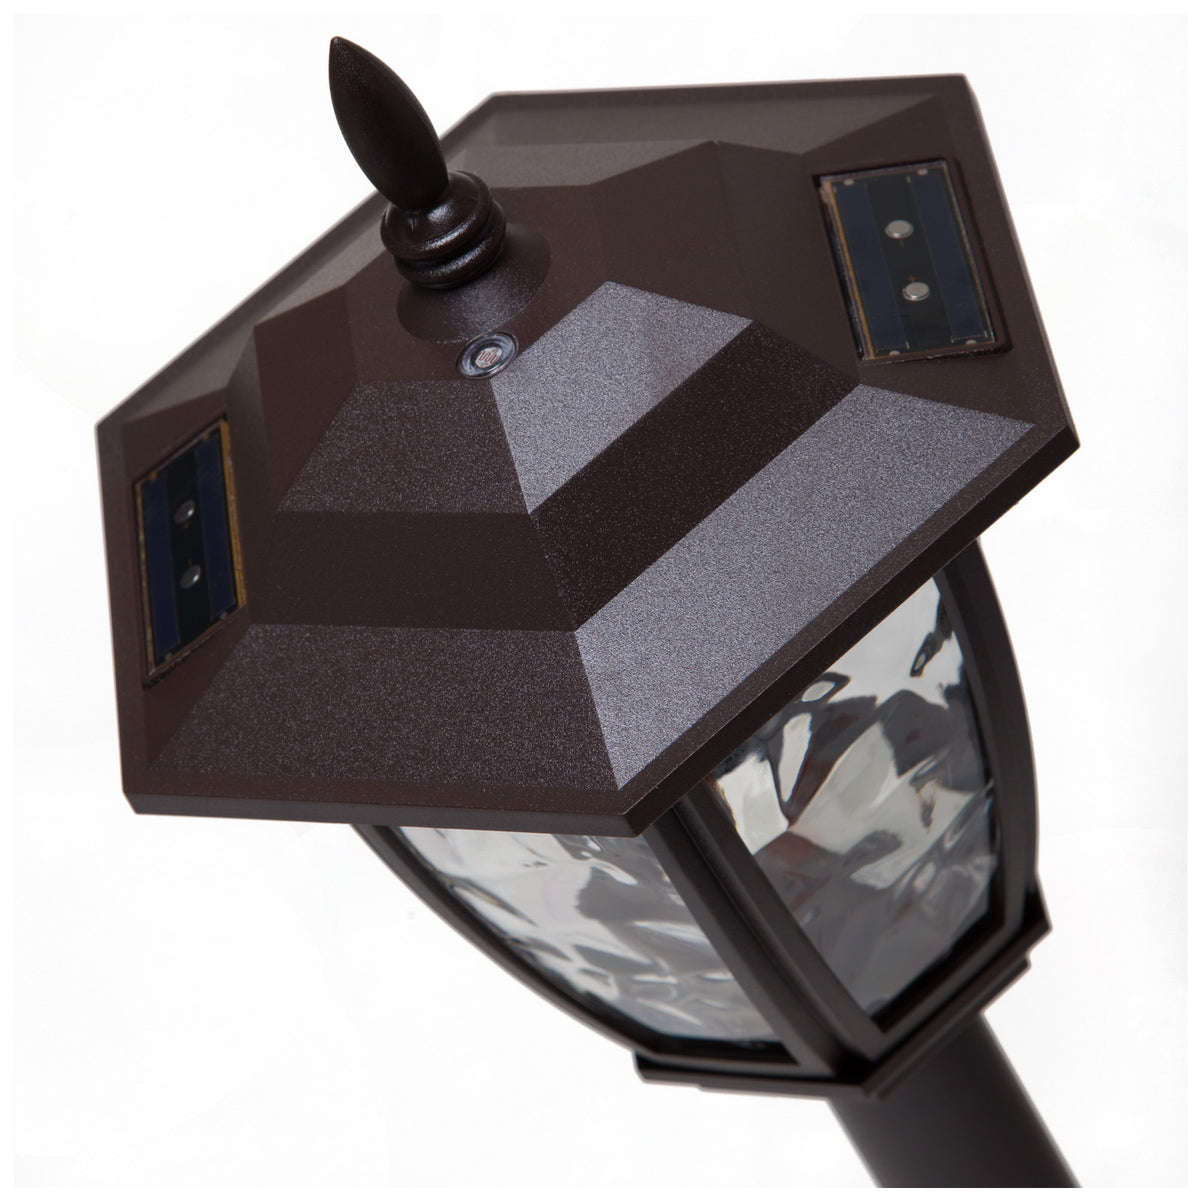 buy outdoor solar lights at cheap rate in bulk. wholesale & retail lamp supplies store. home décor ideas, maintenance, repair replacement parts